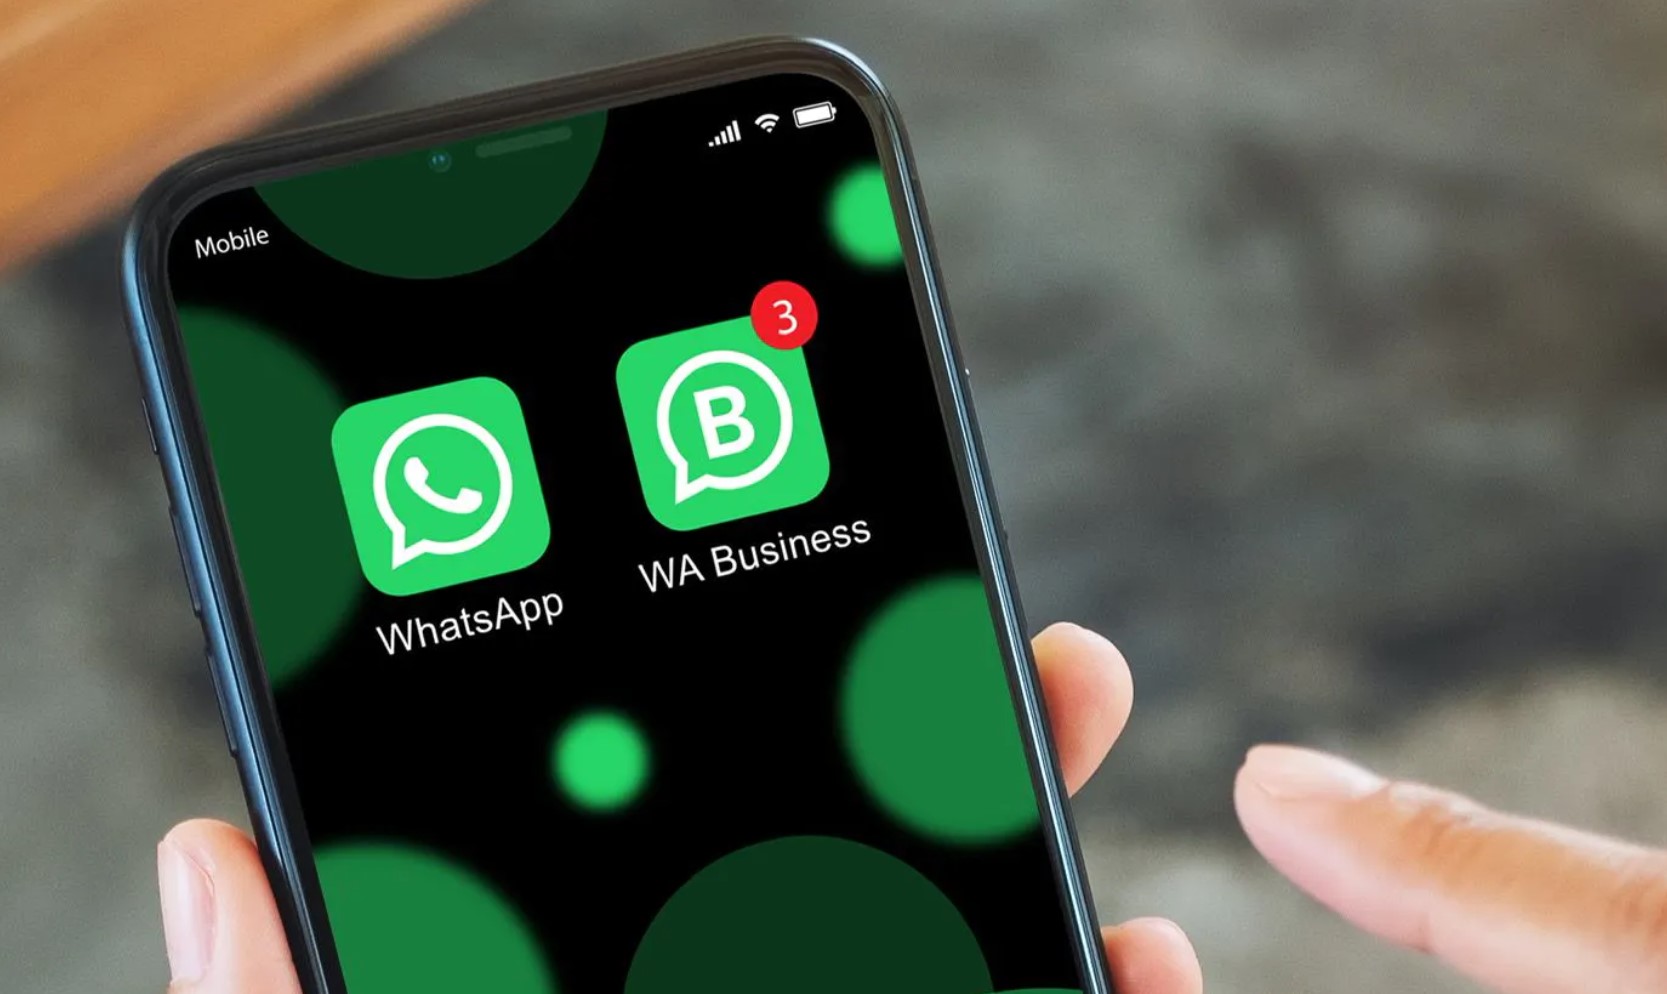 How to Get Virtual Number for WhatsApp